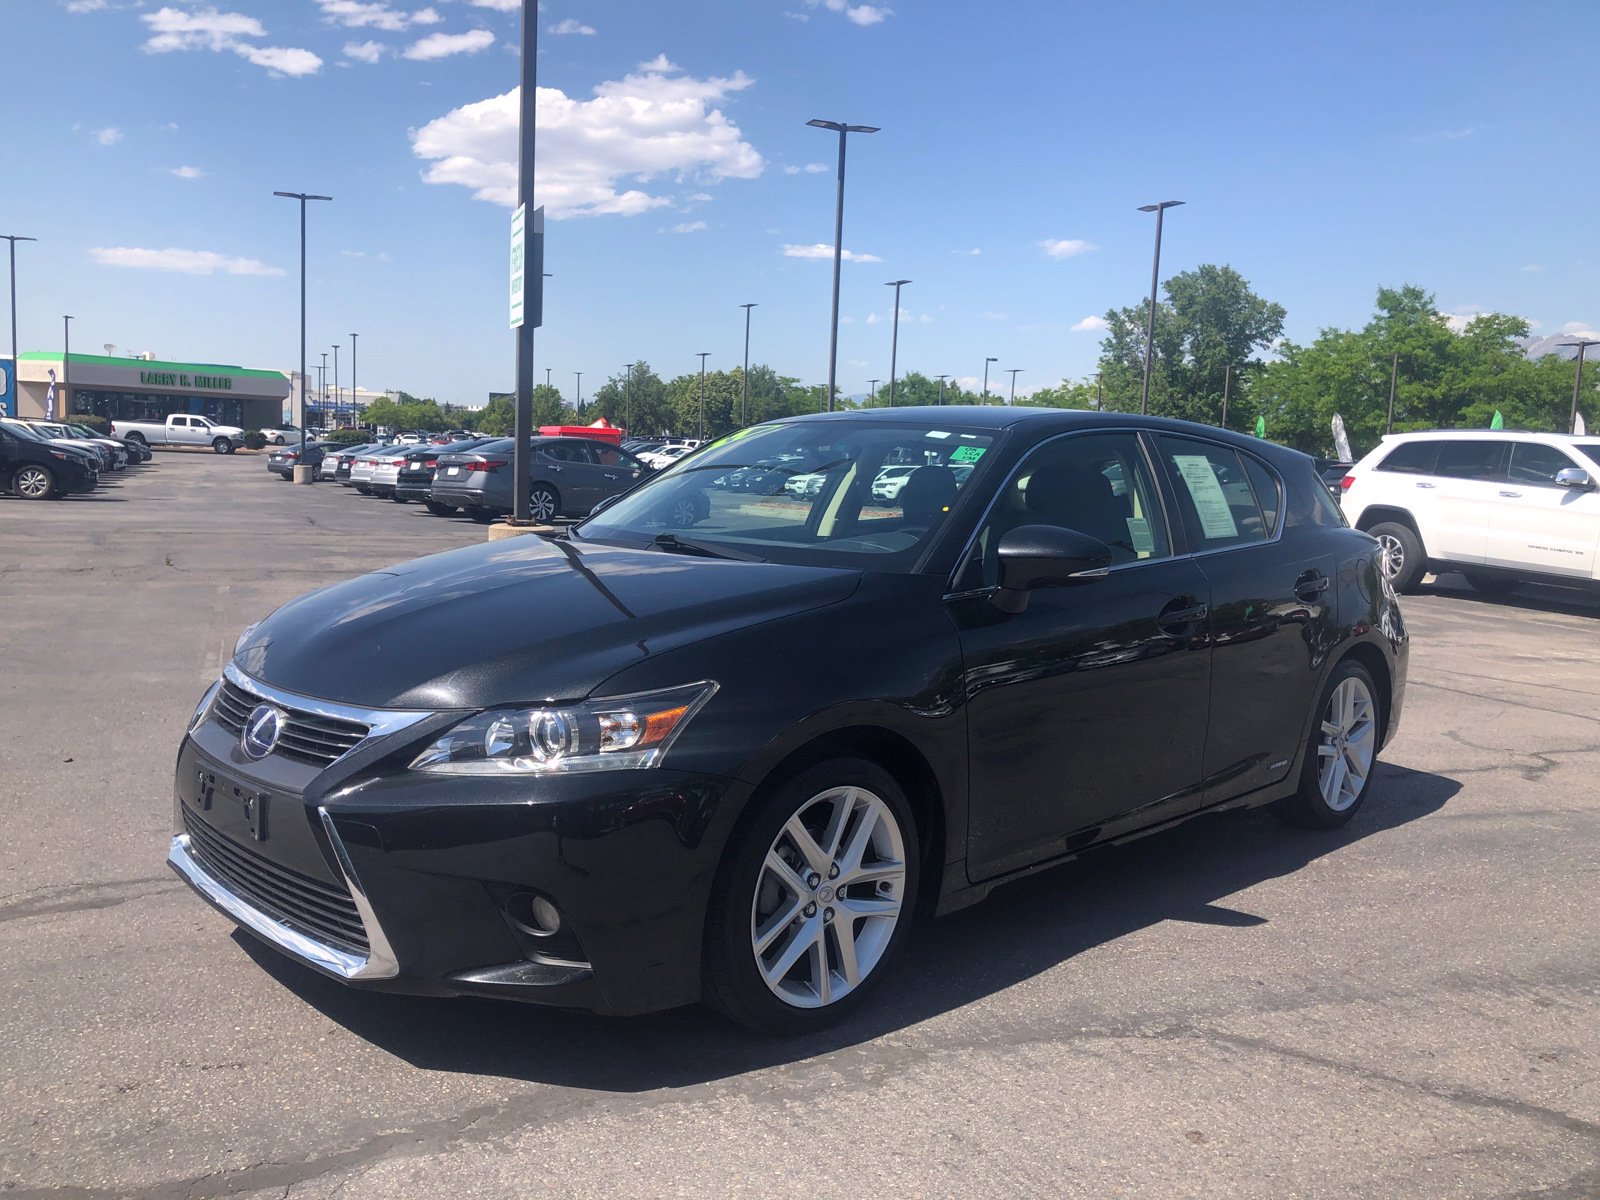 PreOwned 2017 Lexus CT 200h Hatchback in Sandy S8300